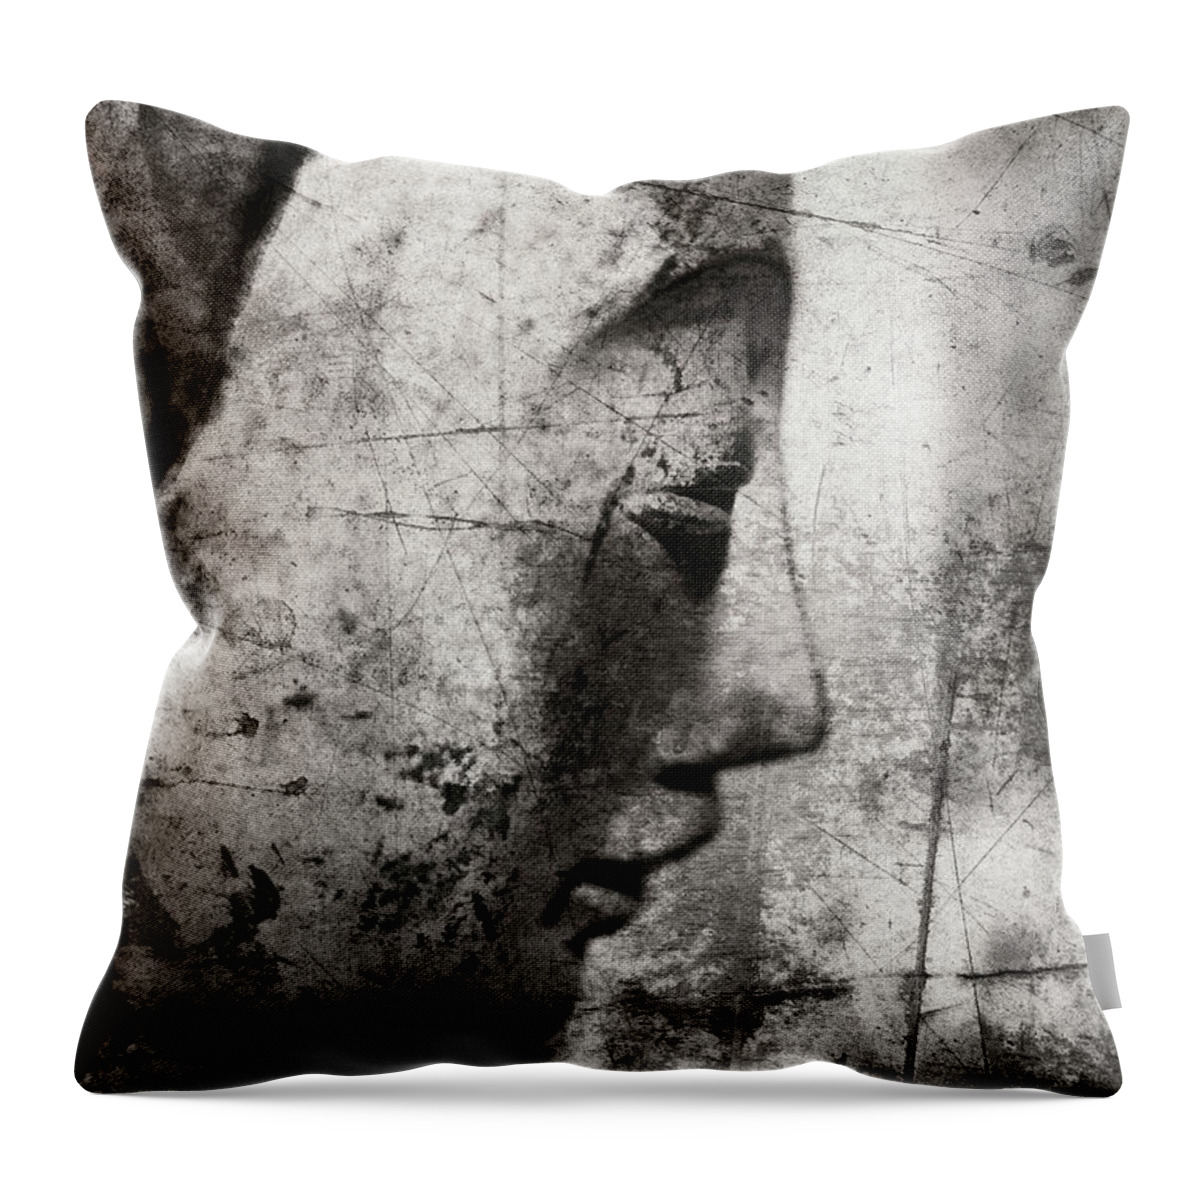 Meditation Throw Pillow featuring the photograph Meditation by Carol Leigh